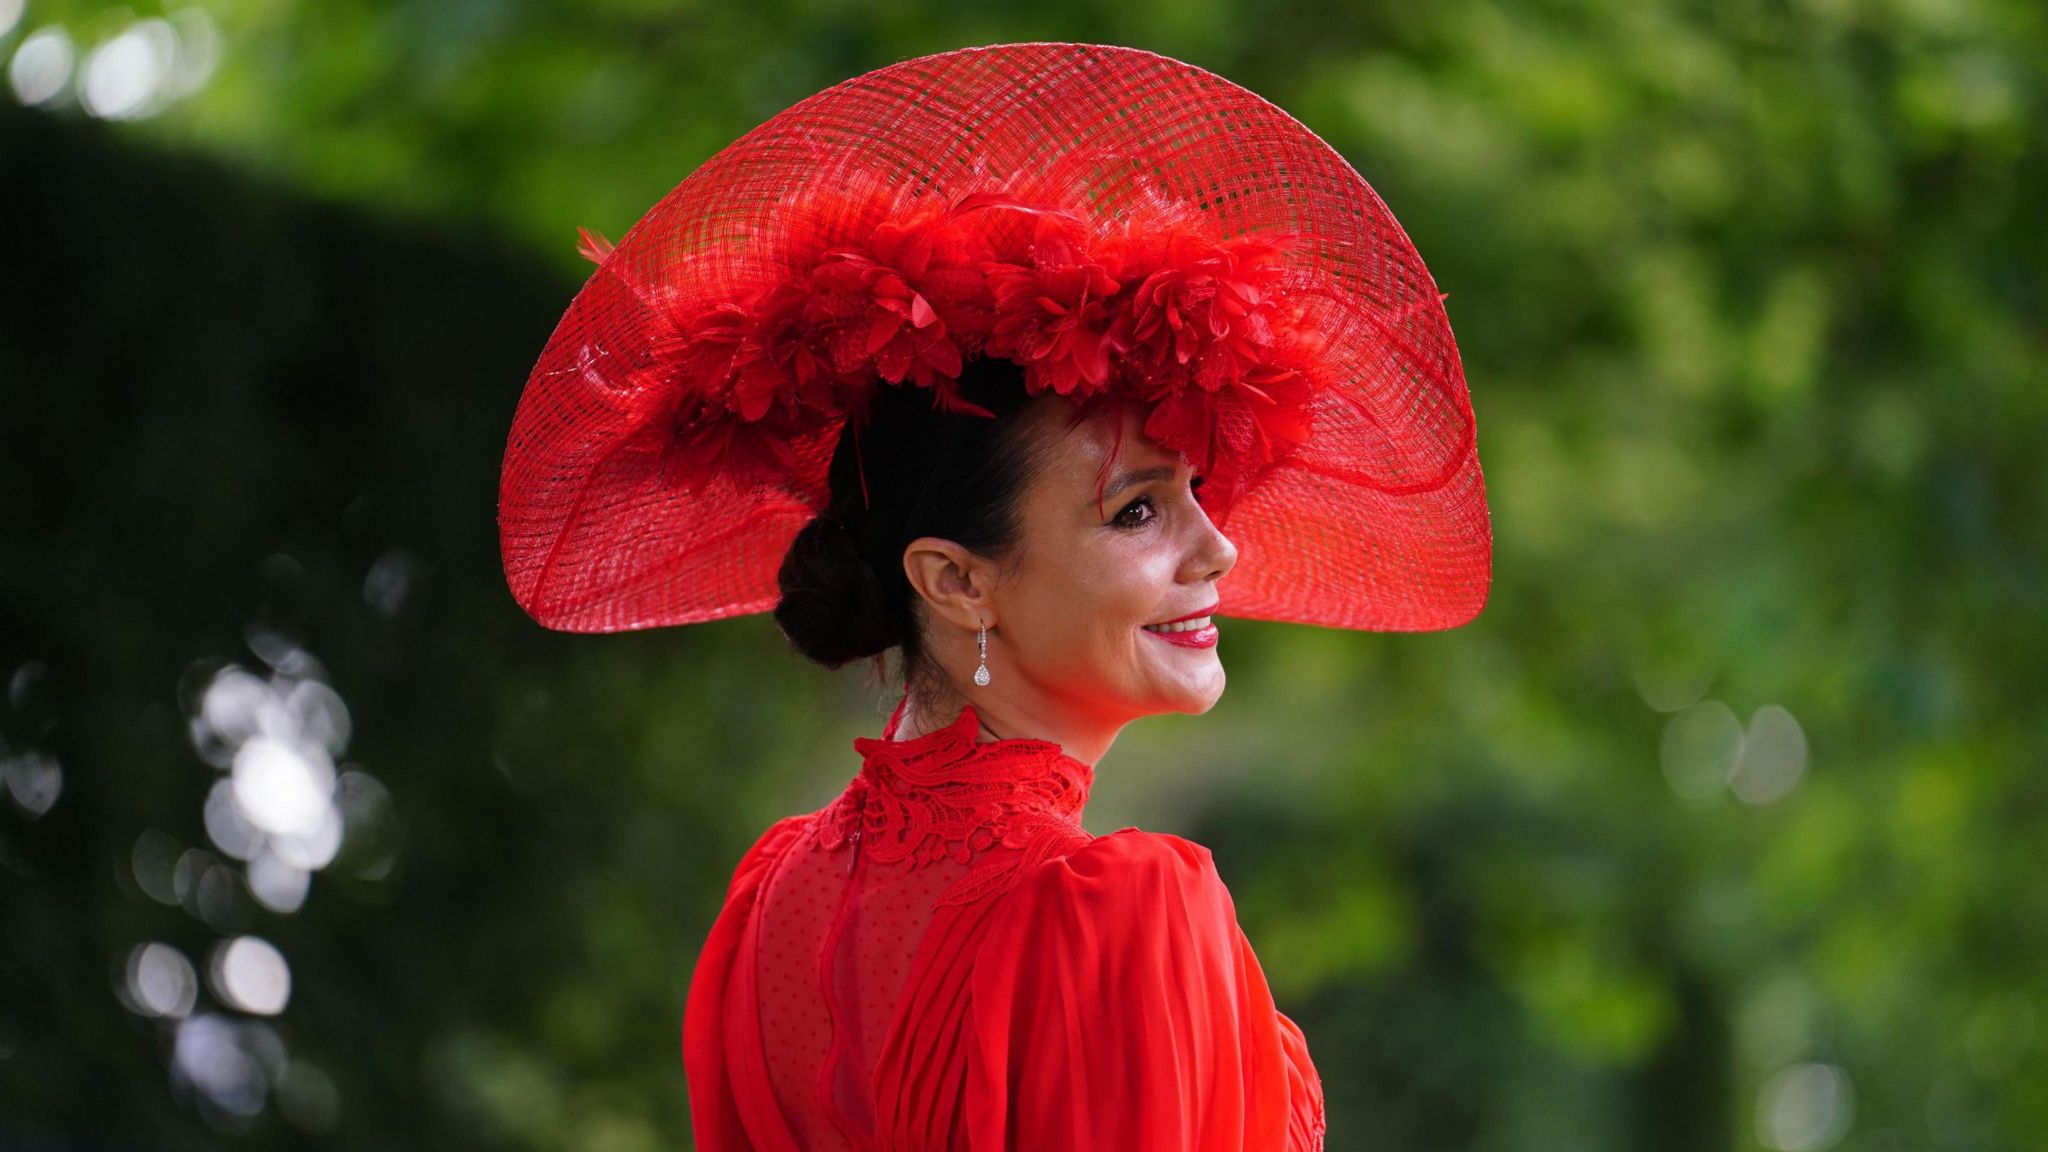 Woman looks away from the camera wearing a large red feathered headdress, with her dark hair in a low slick bun and a high collared red dress